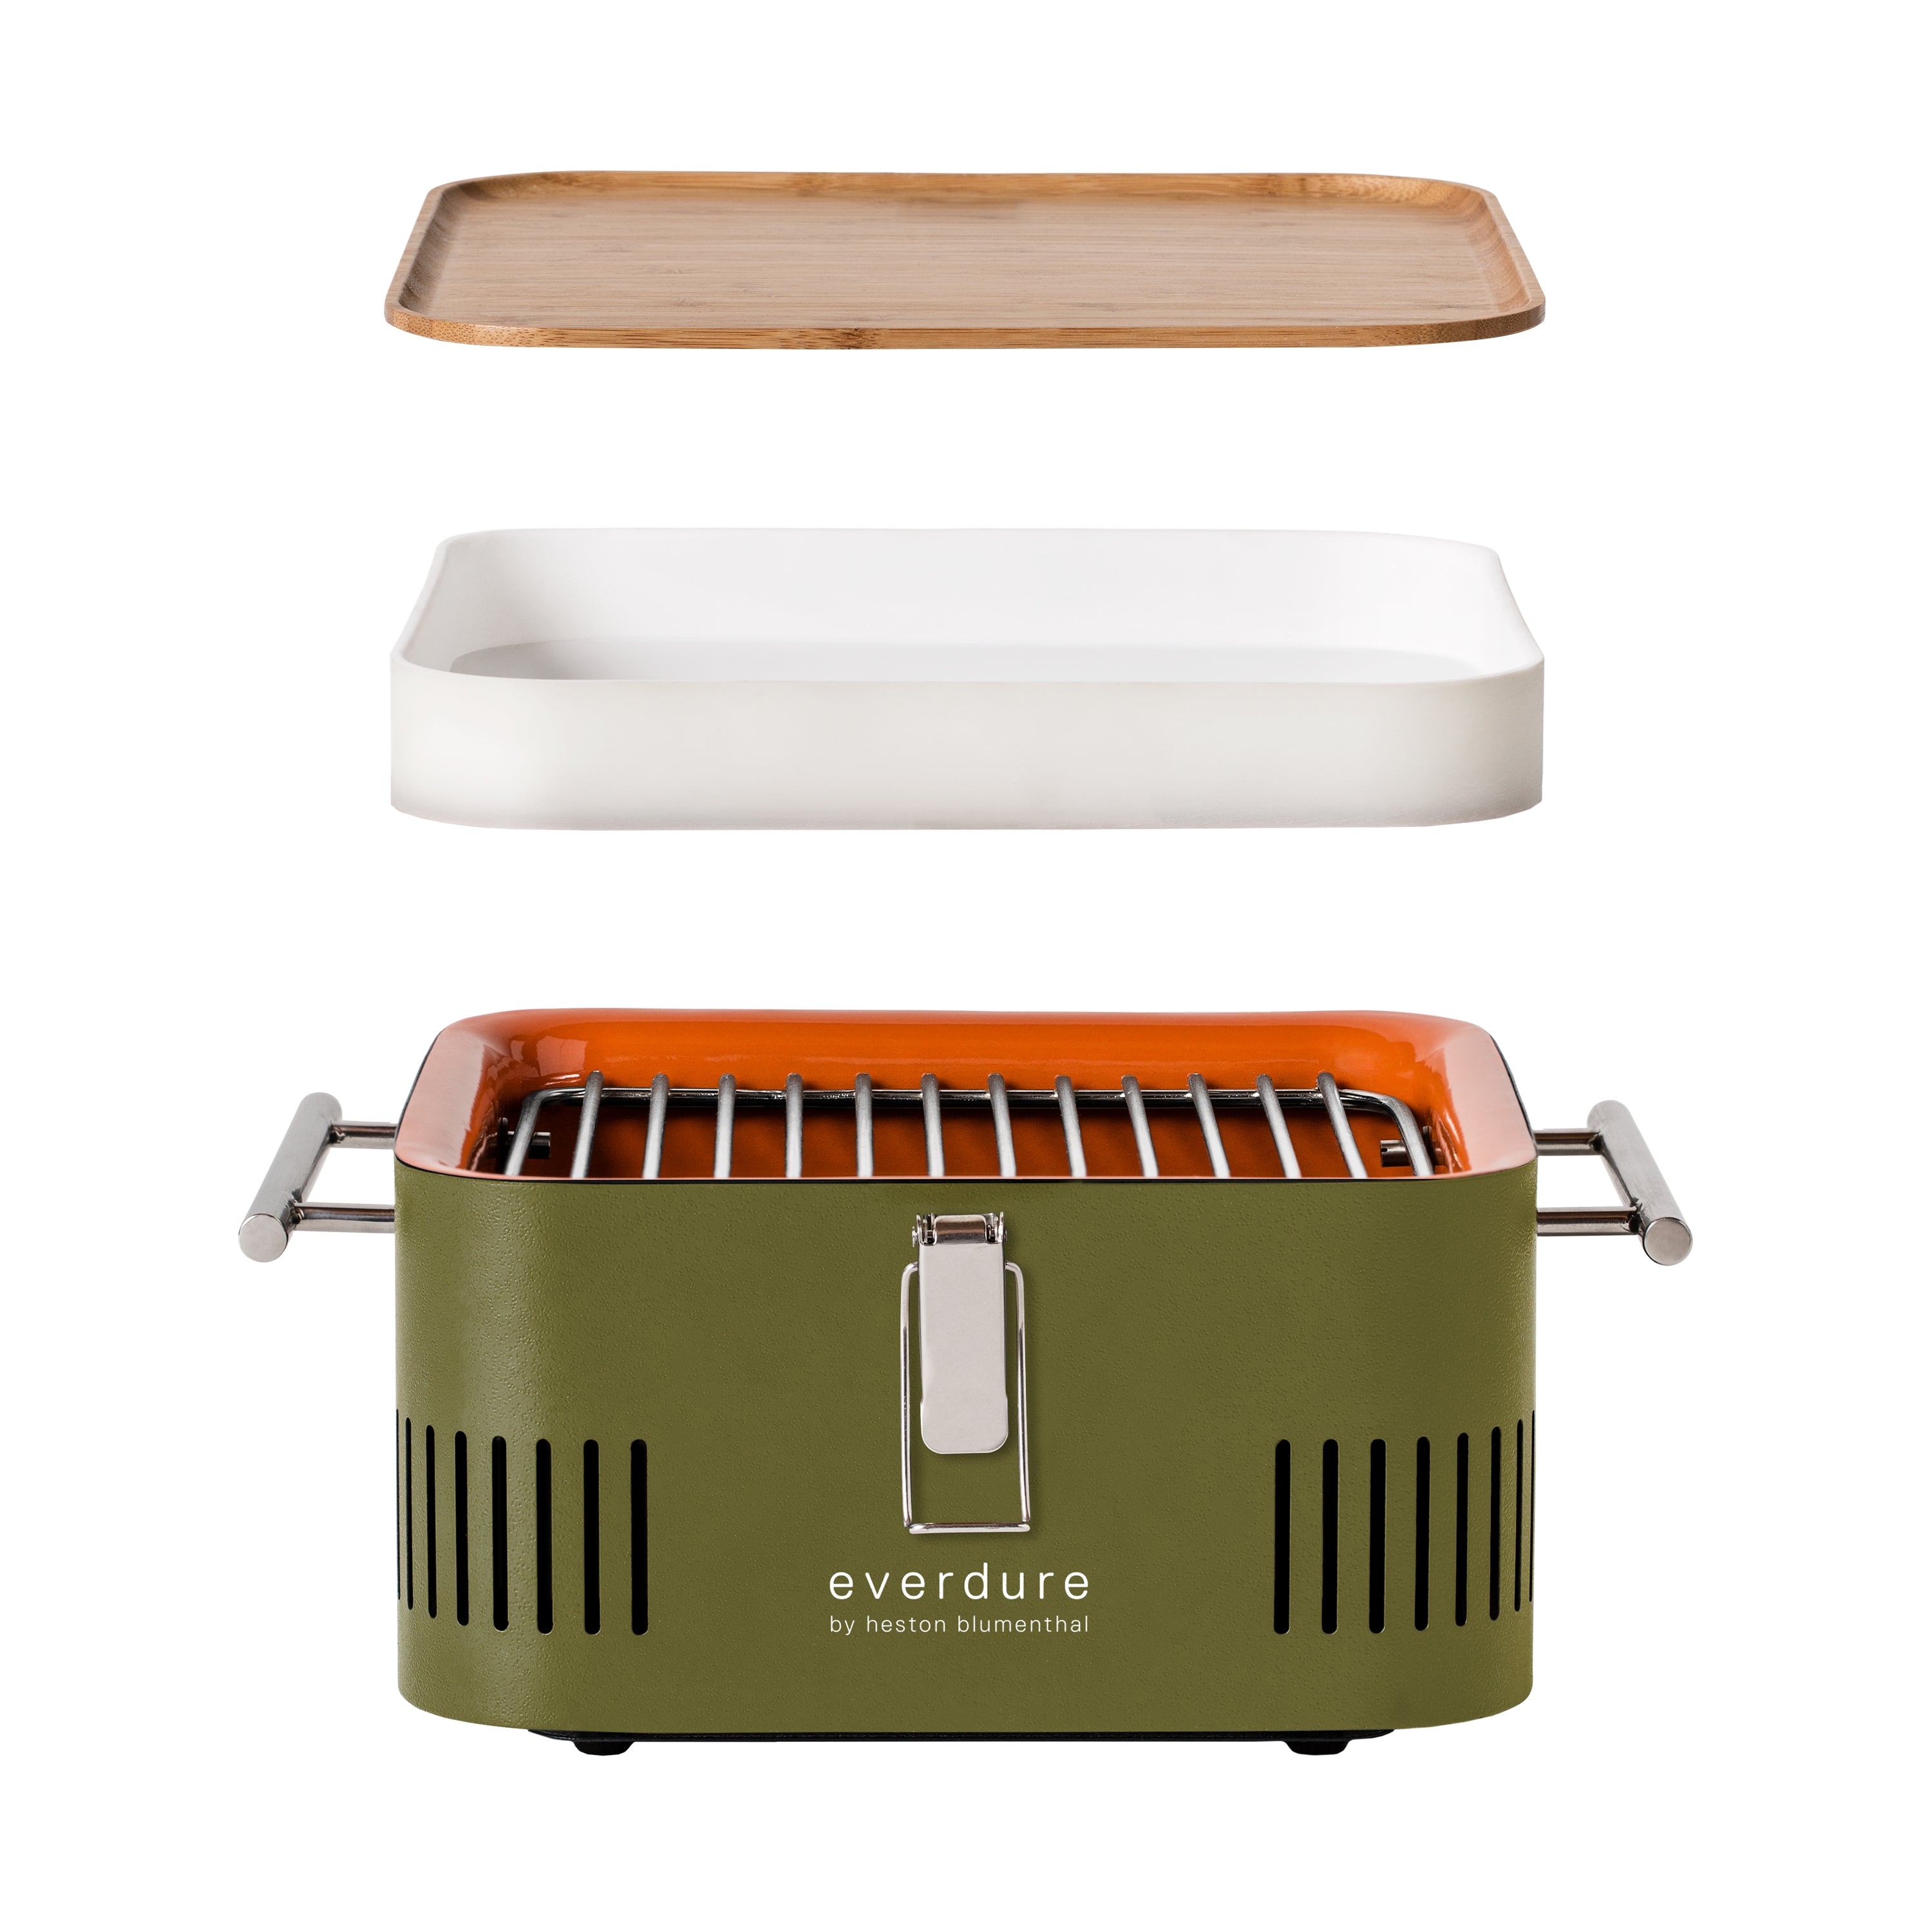 Everdure CUBE Charcoal Grill